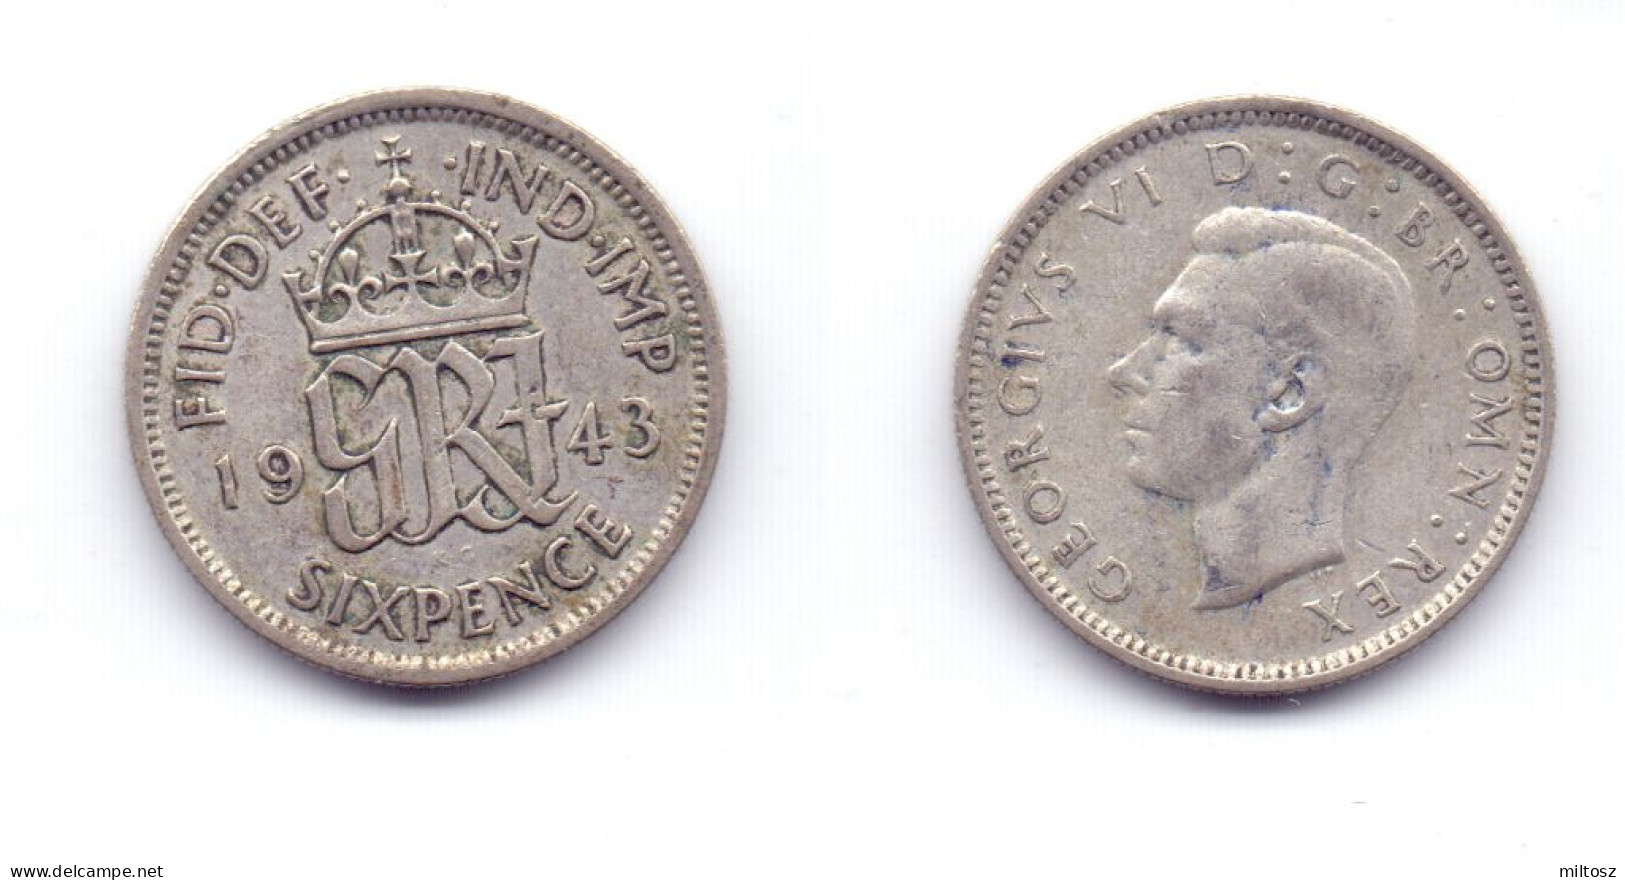 Great Britain 6 Pence 1943 - H. 6 Pence